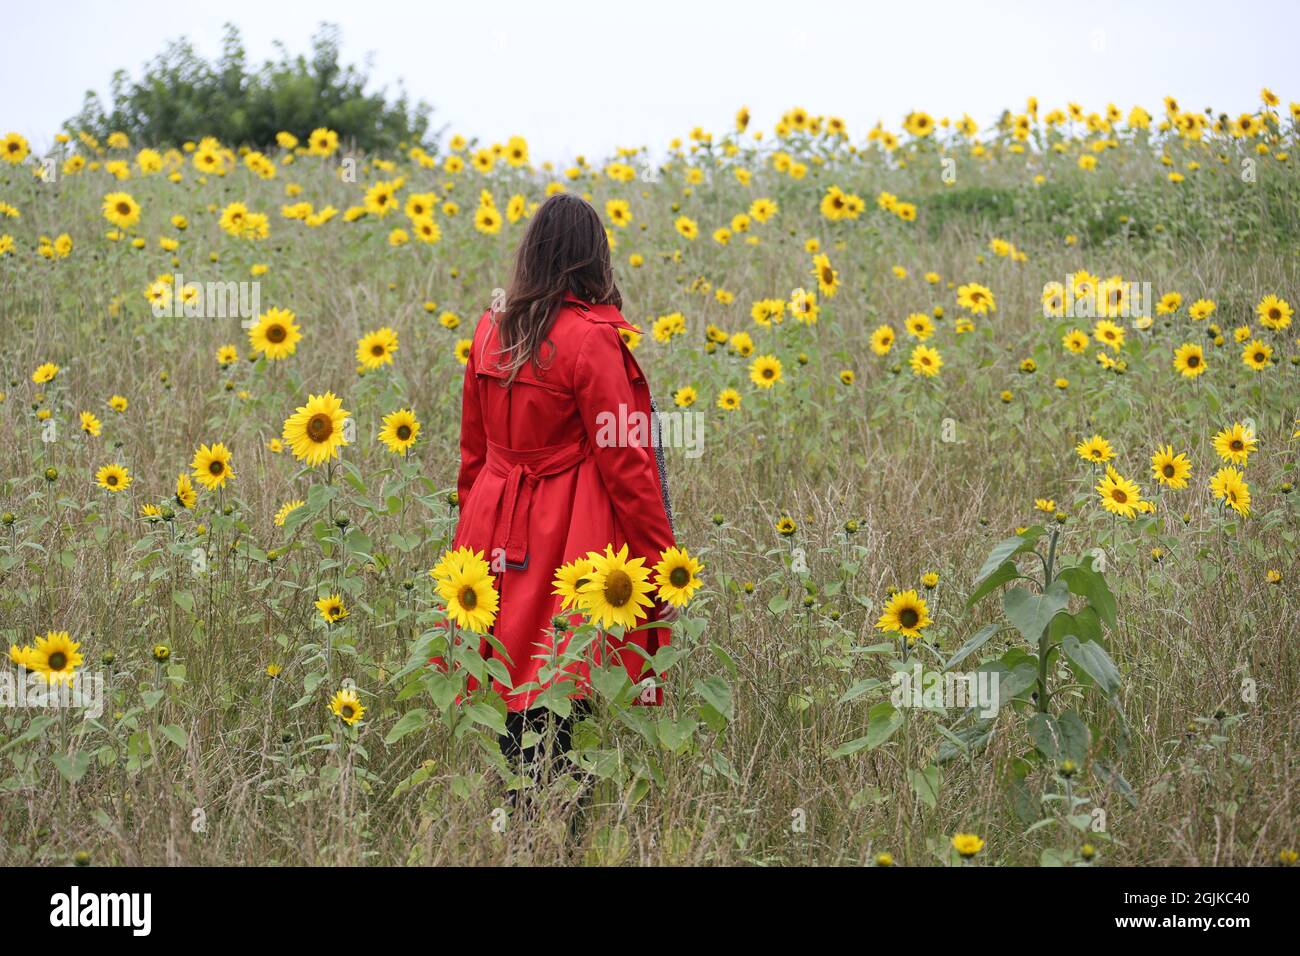 Elie, Fife, Scotland, Mature woman in red raincoat, walks through a field of bright yellow sunflowers. Contrast of woman red coat and yellow flowers. Stock Photo